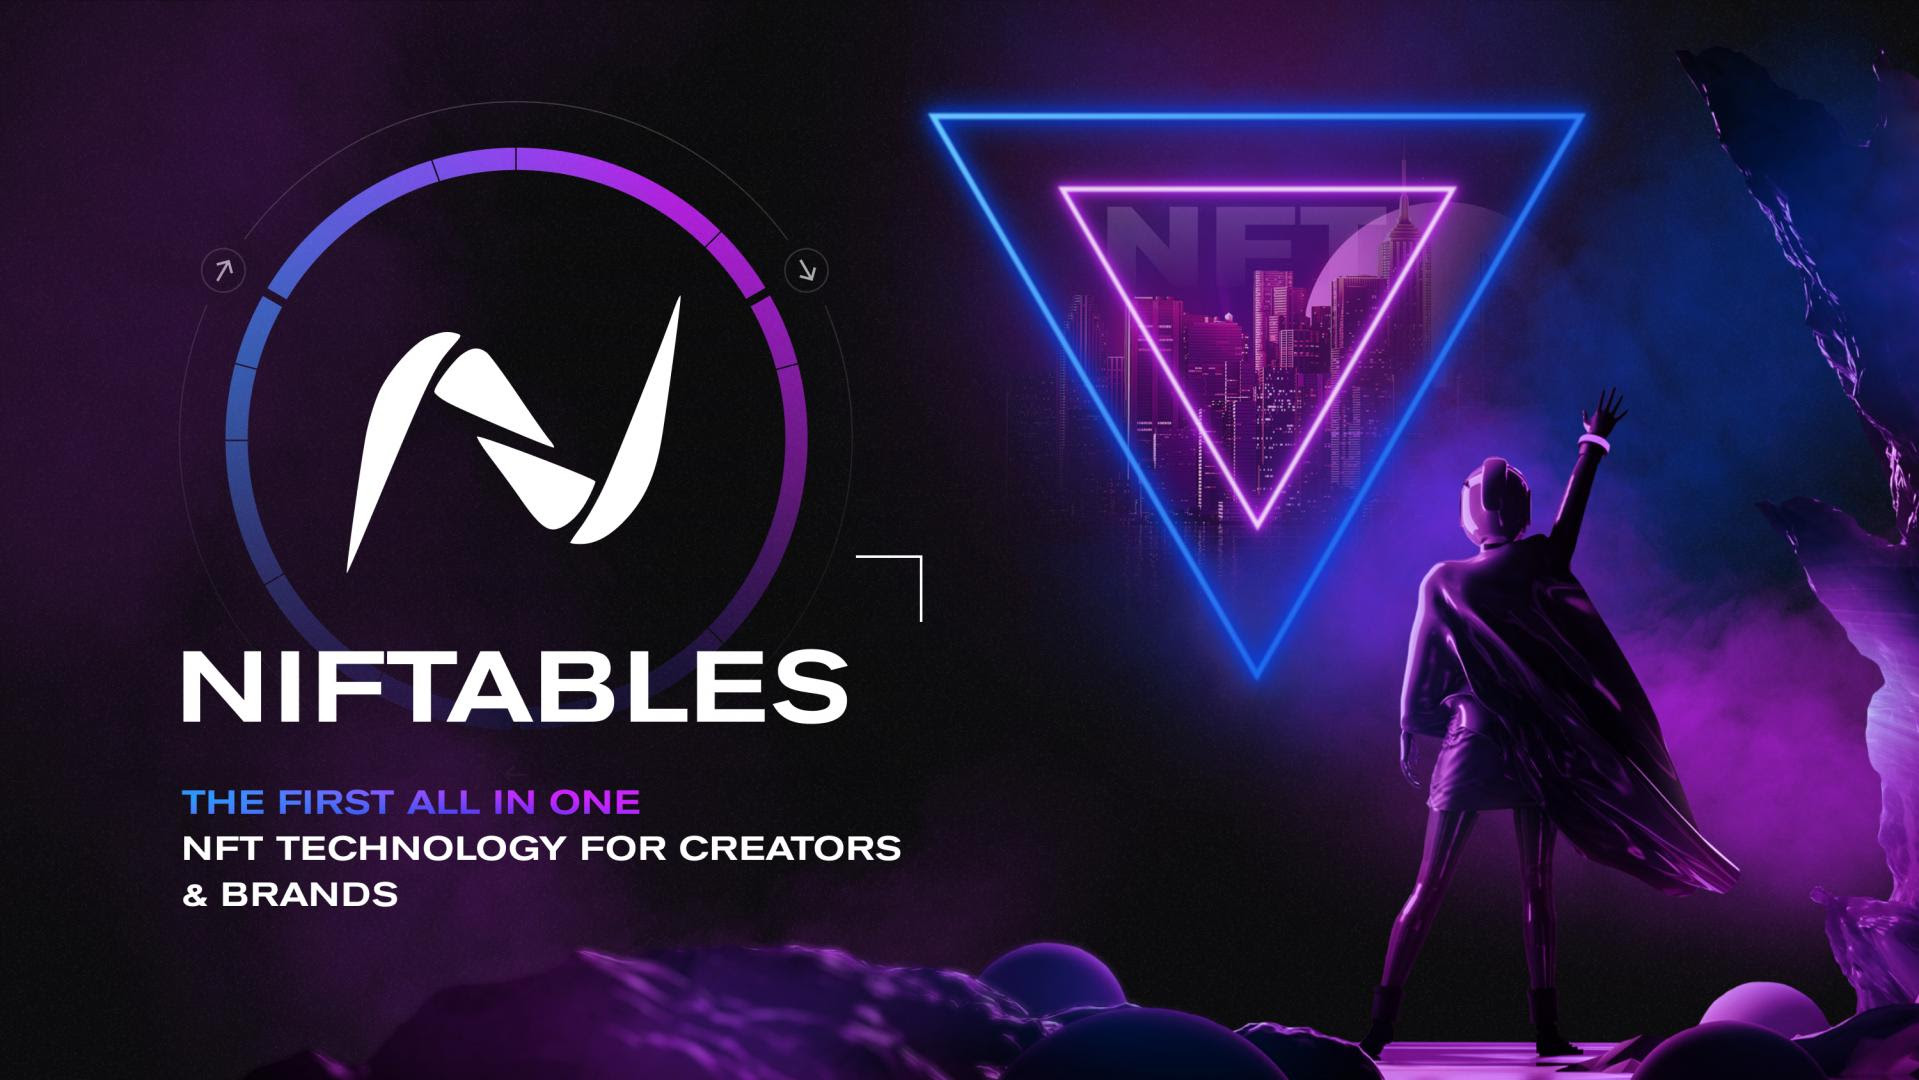 Niftables Launches all-in-one NFT Platform for Brands and Creators